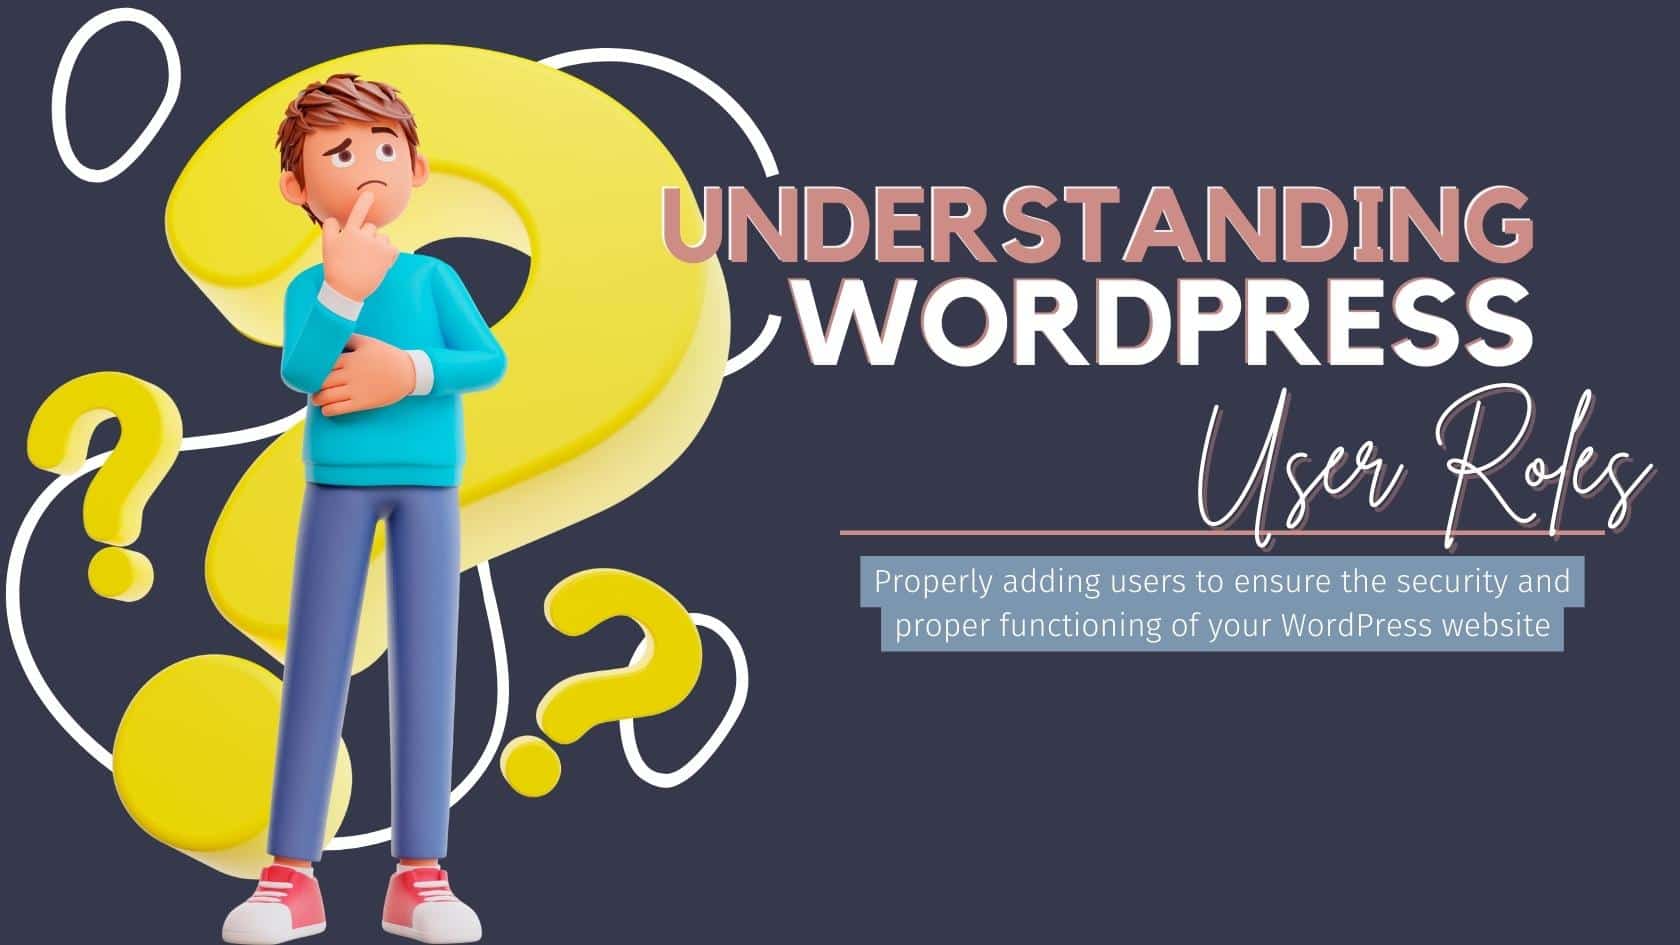 understanding wordpress user roles Properly adding users to ensure the security and proper functioning of your WordPress website